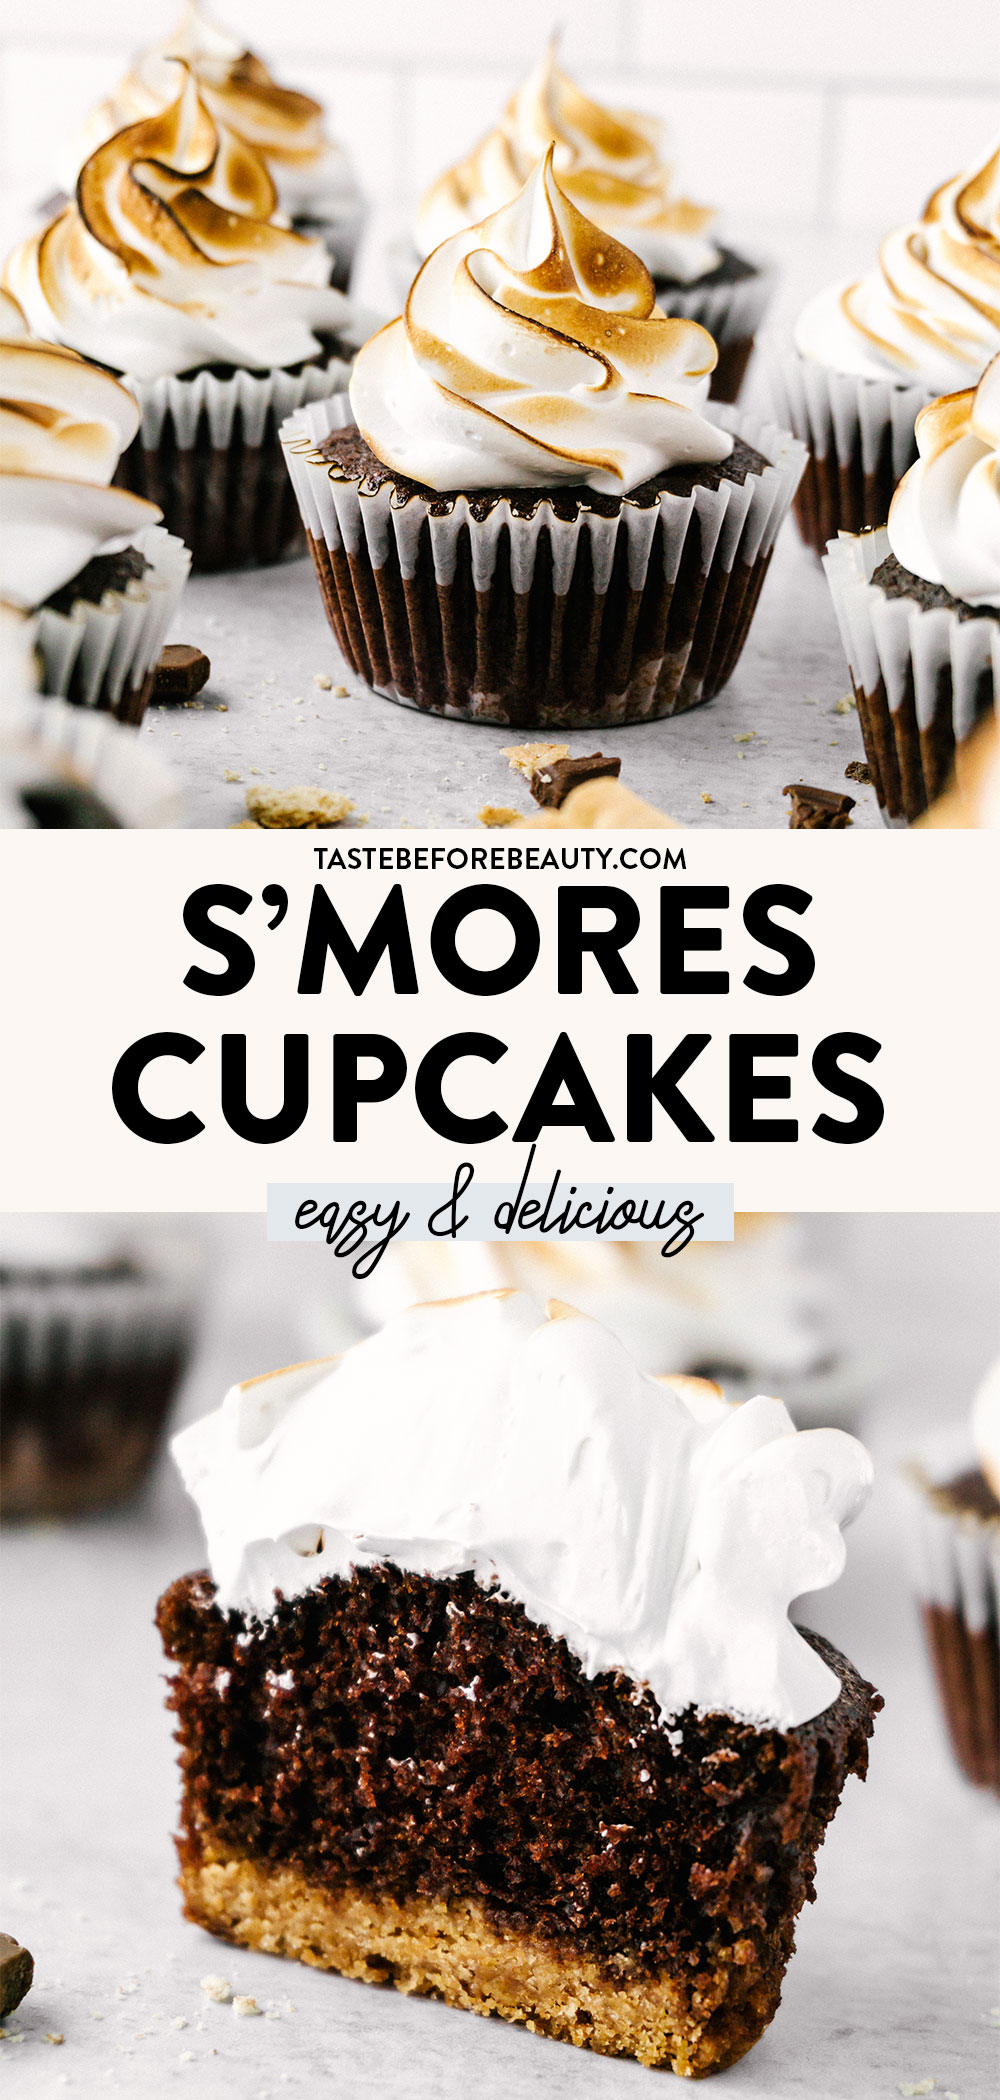 s'mores cupcakes pinterest pin